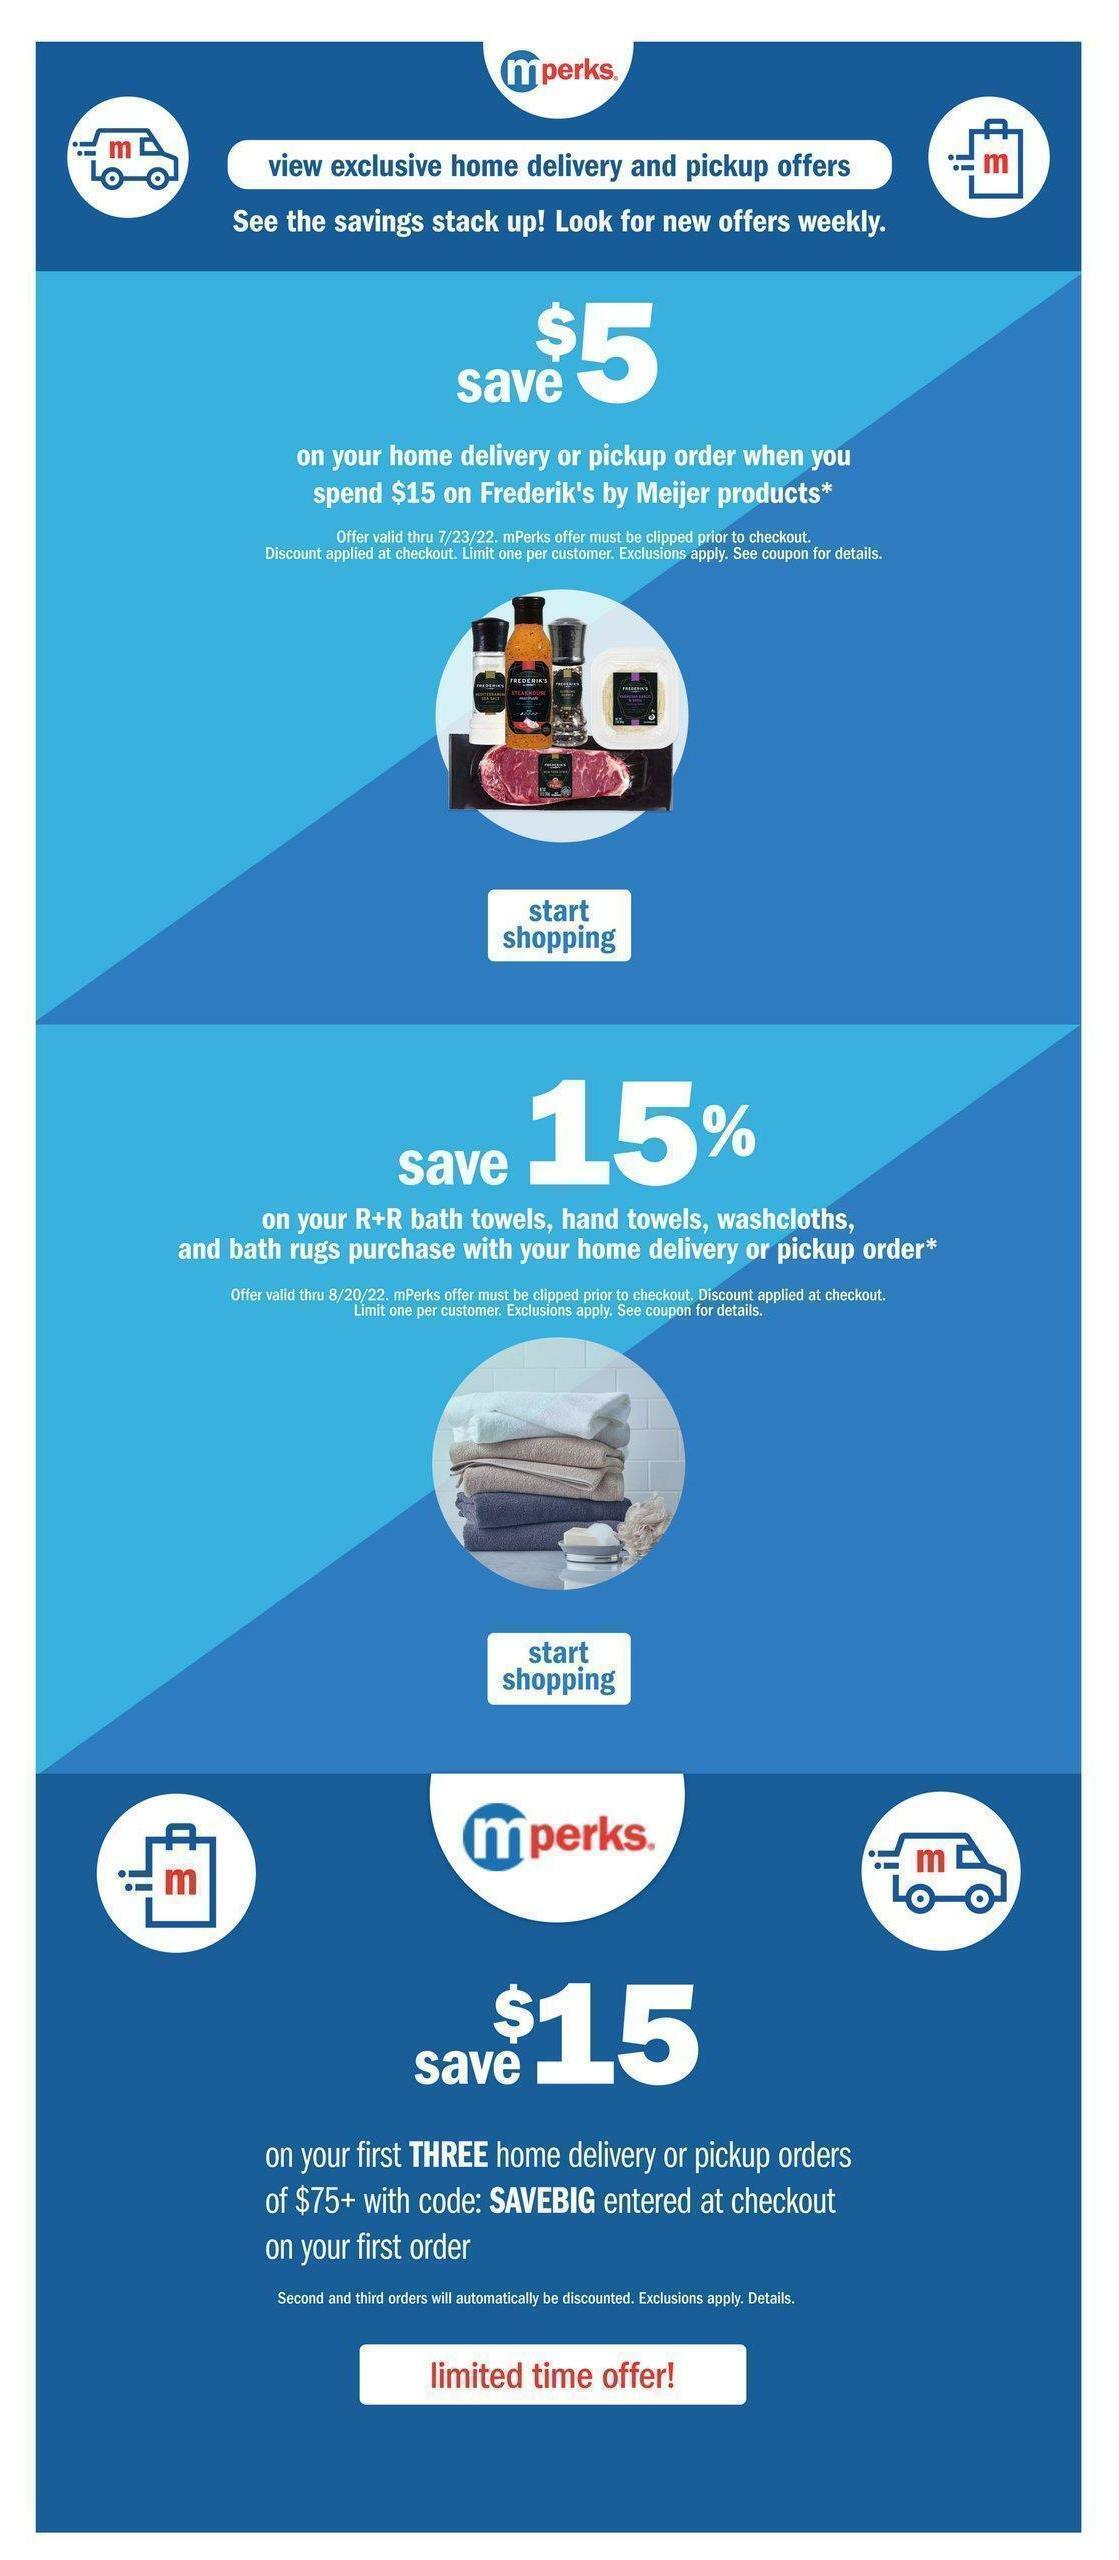 Meijer Weekly Ad from July 17